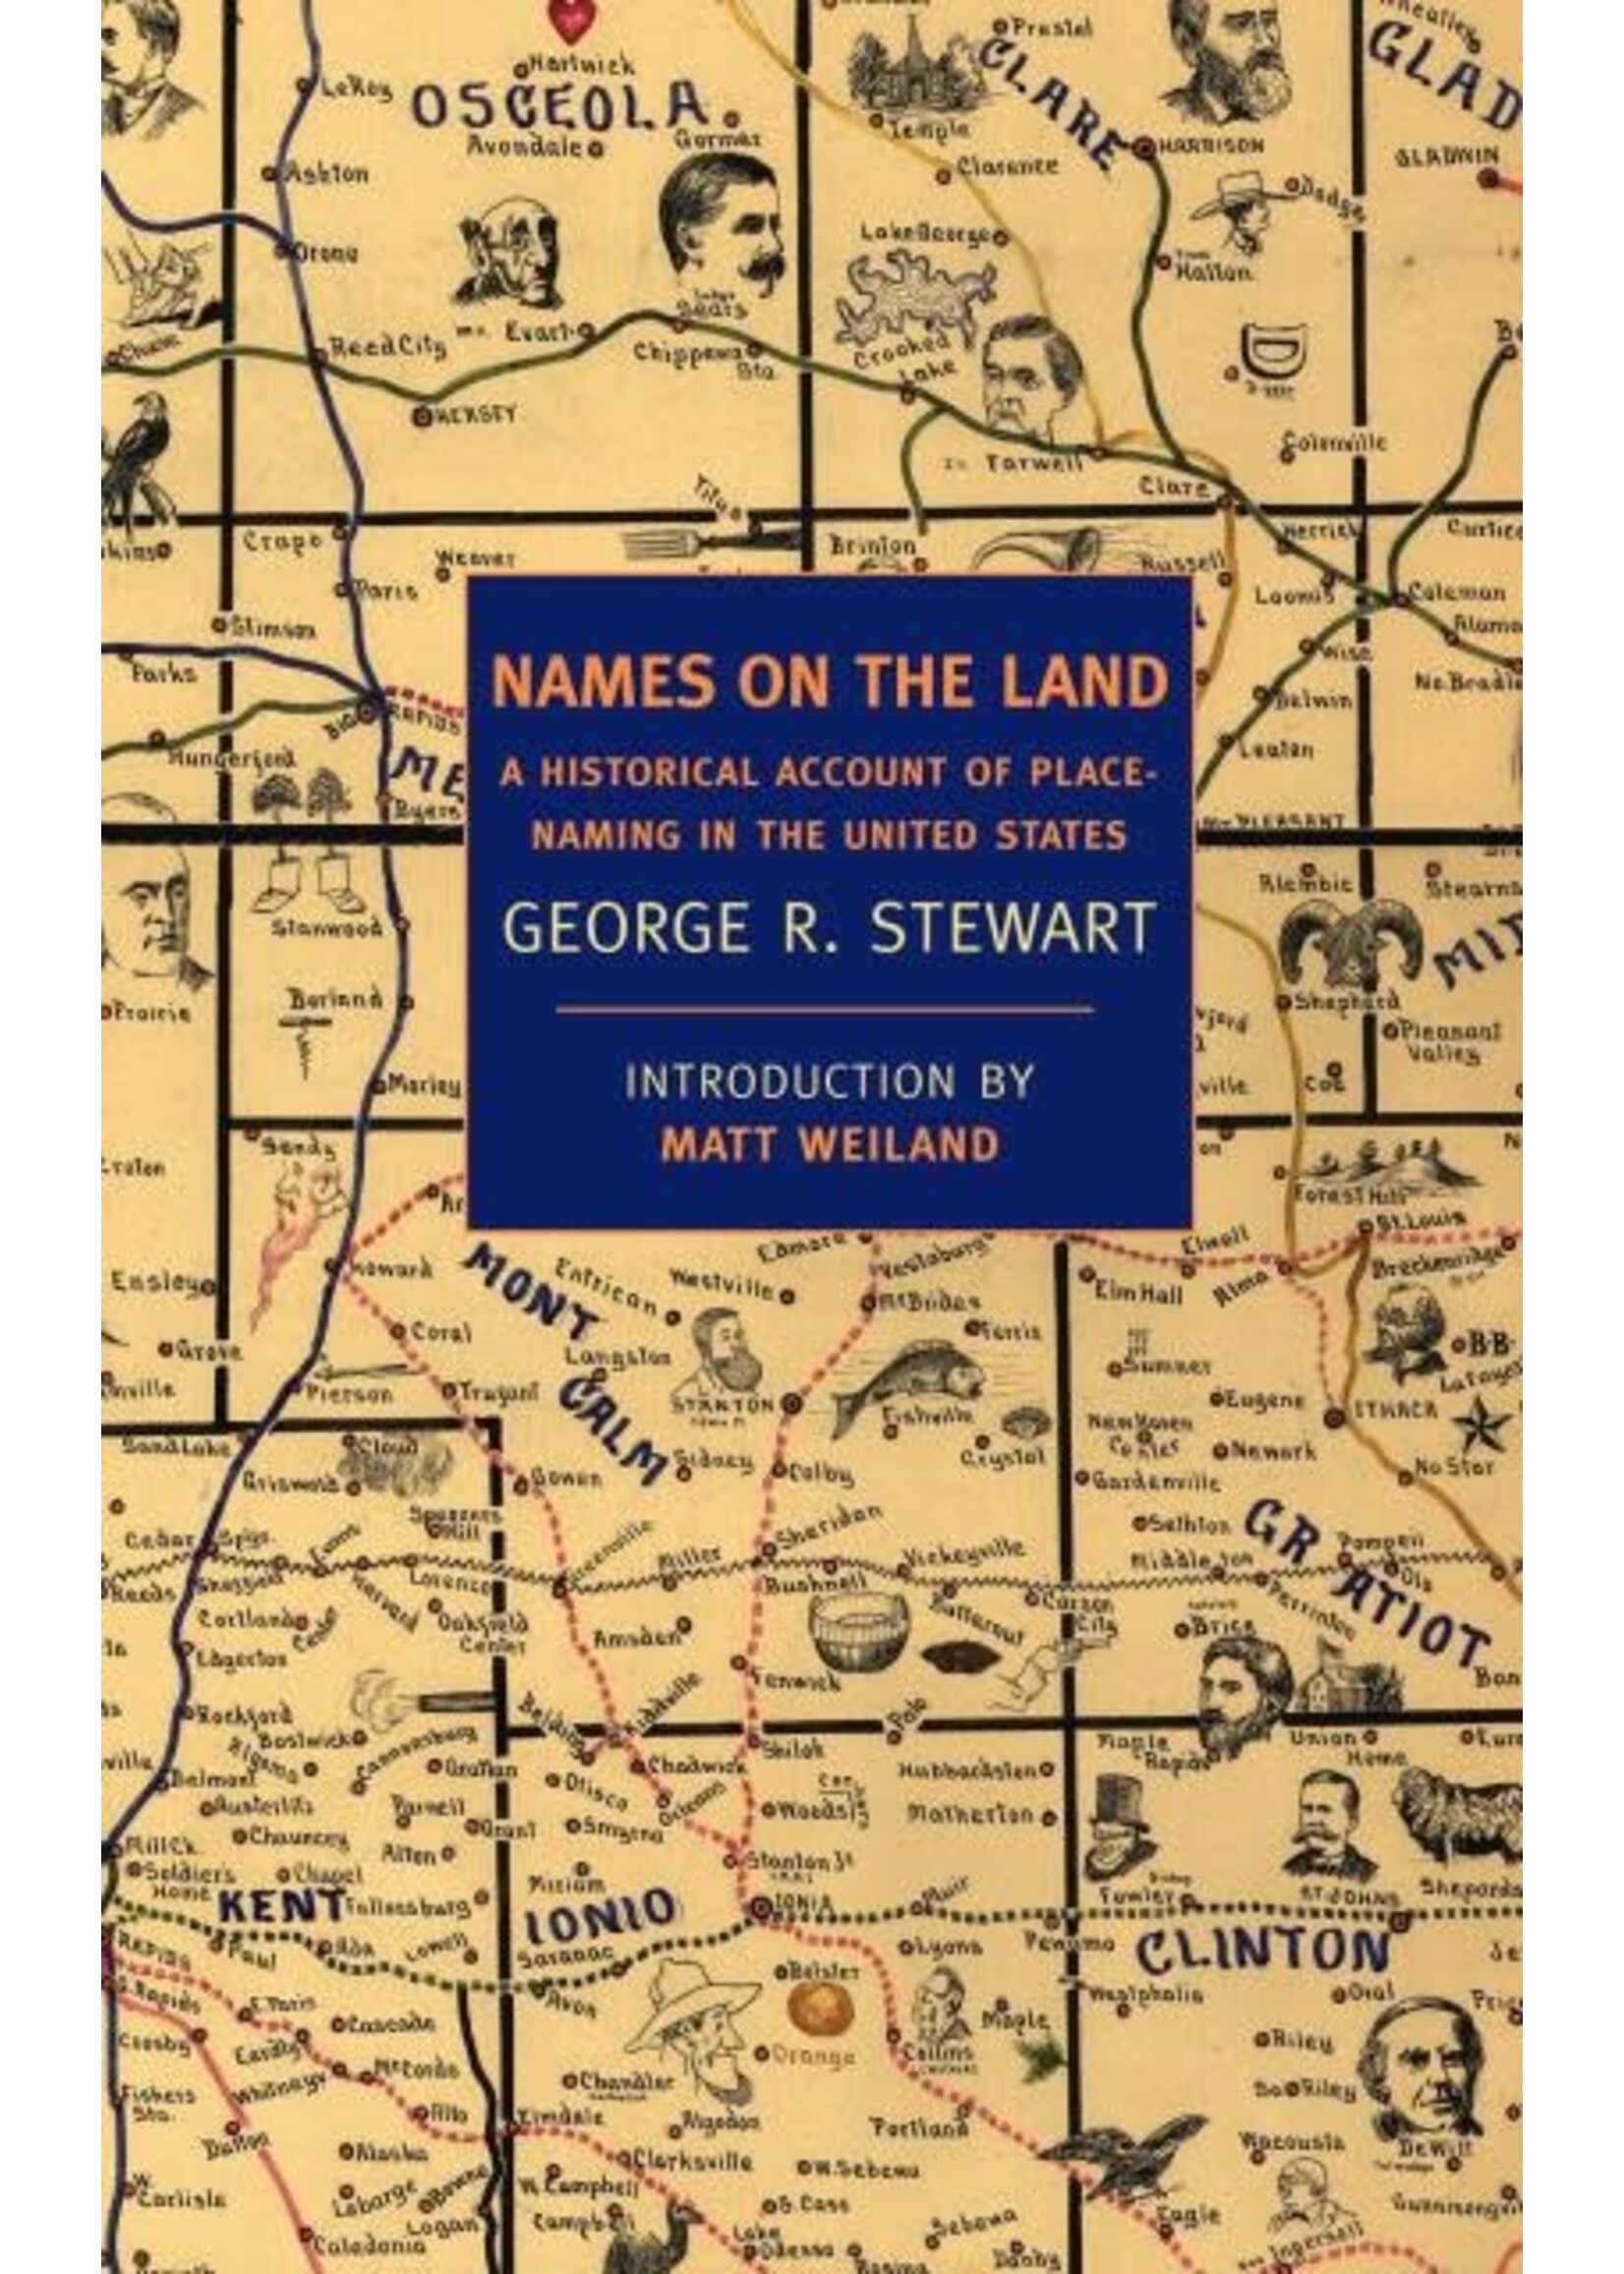 Names on the Land: A Historical Account of Place-Naming in the United States by George R. Stewart